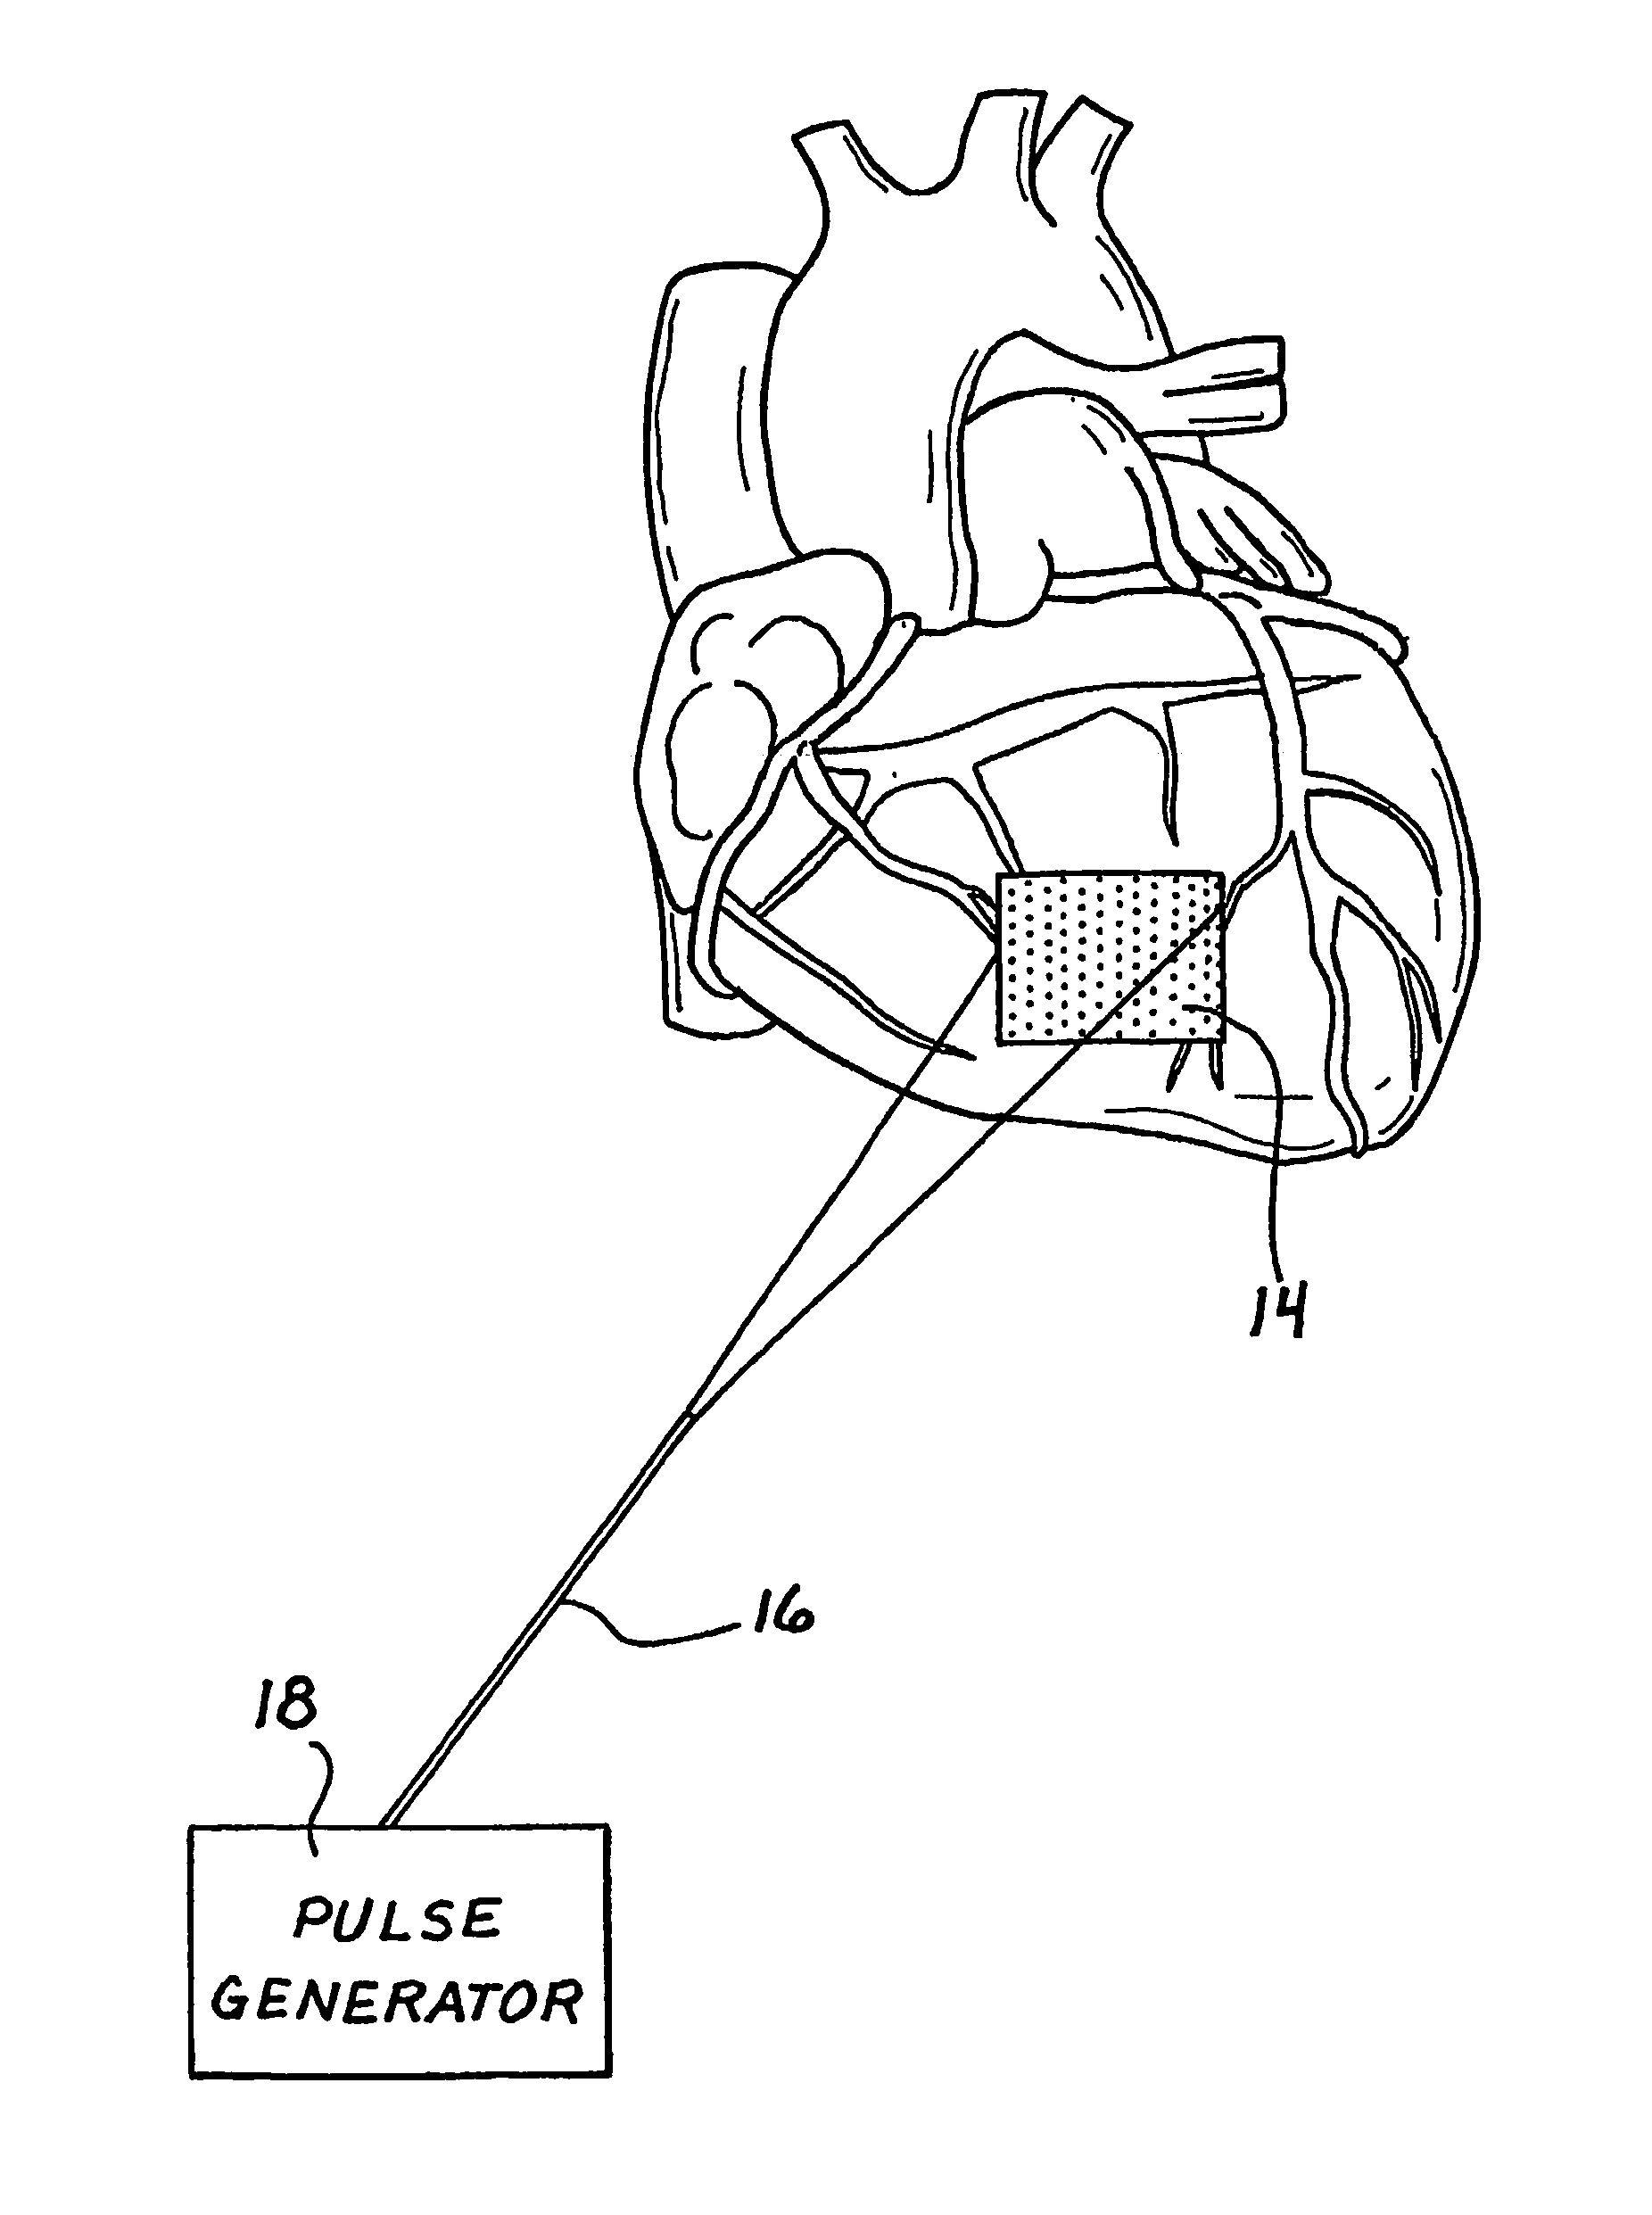 Method and apparatus for using an electromagnetic field in cellular transplantation